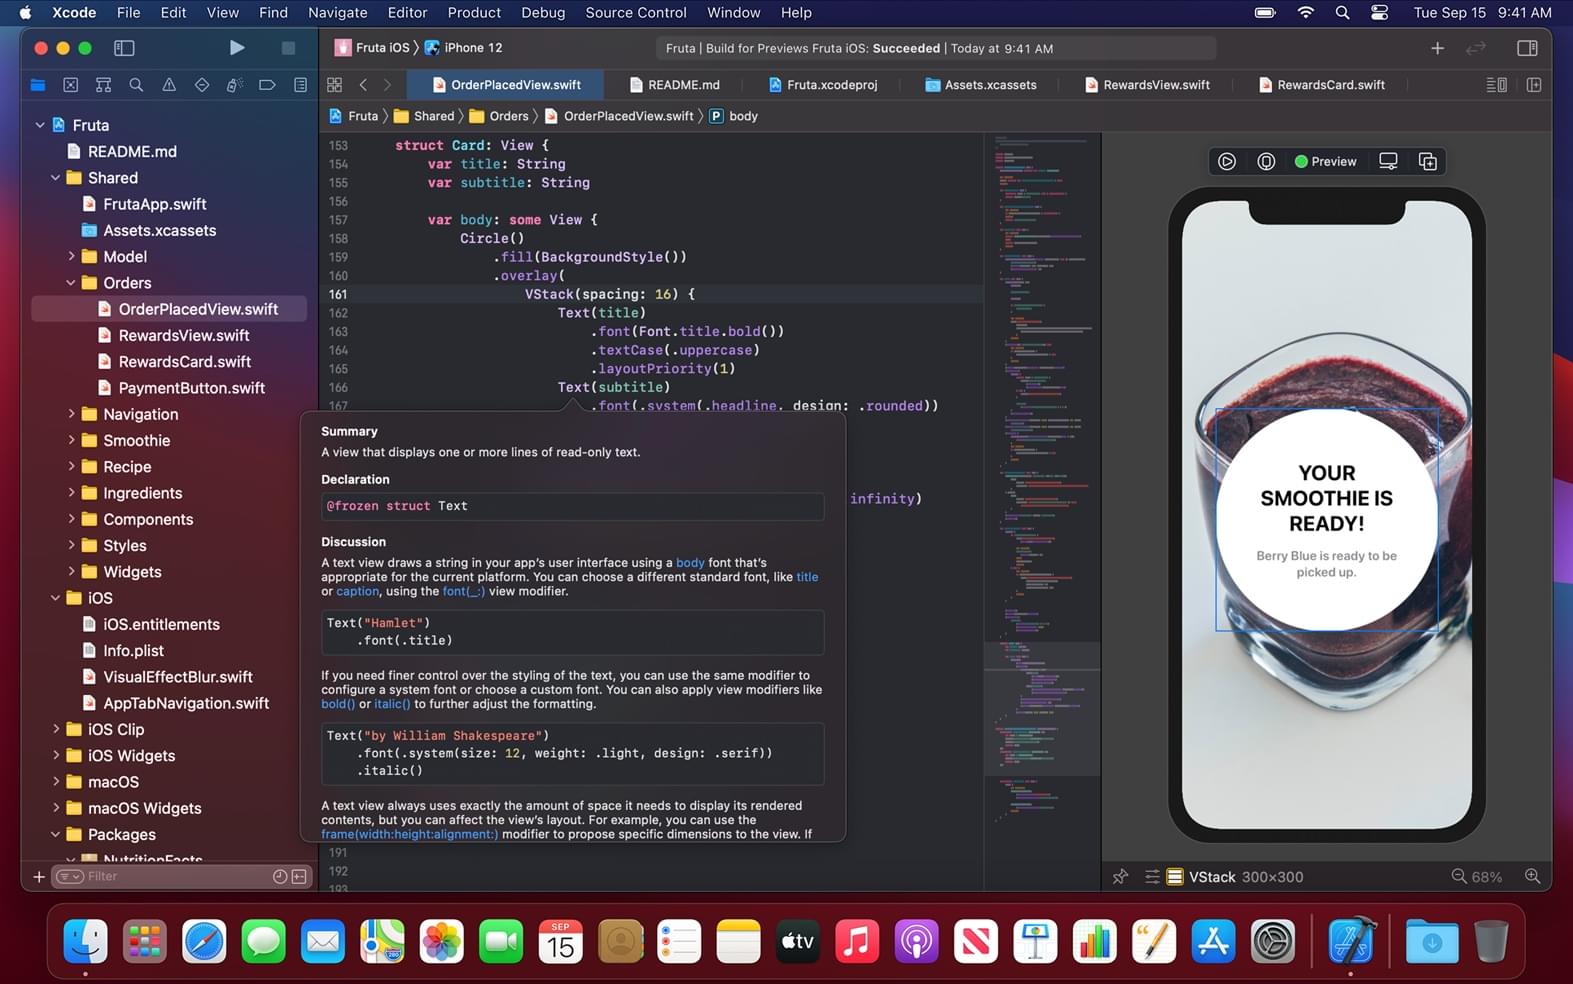 Xcode 13 IDE interface